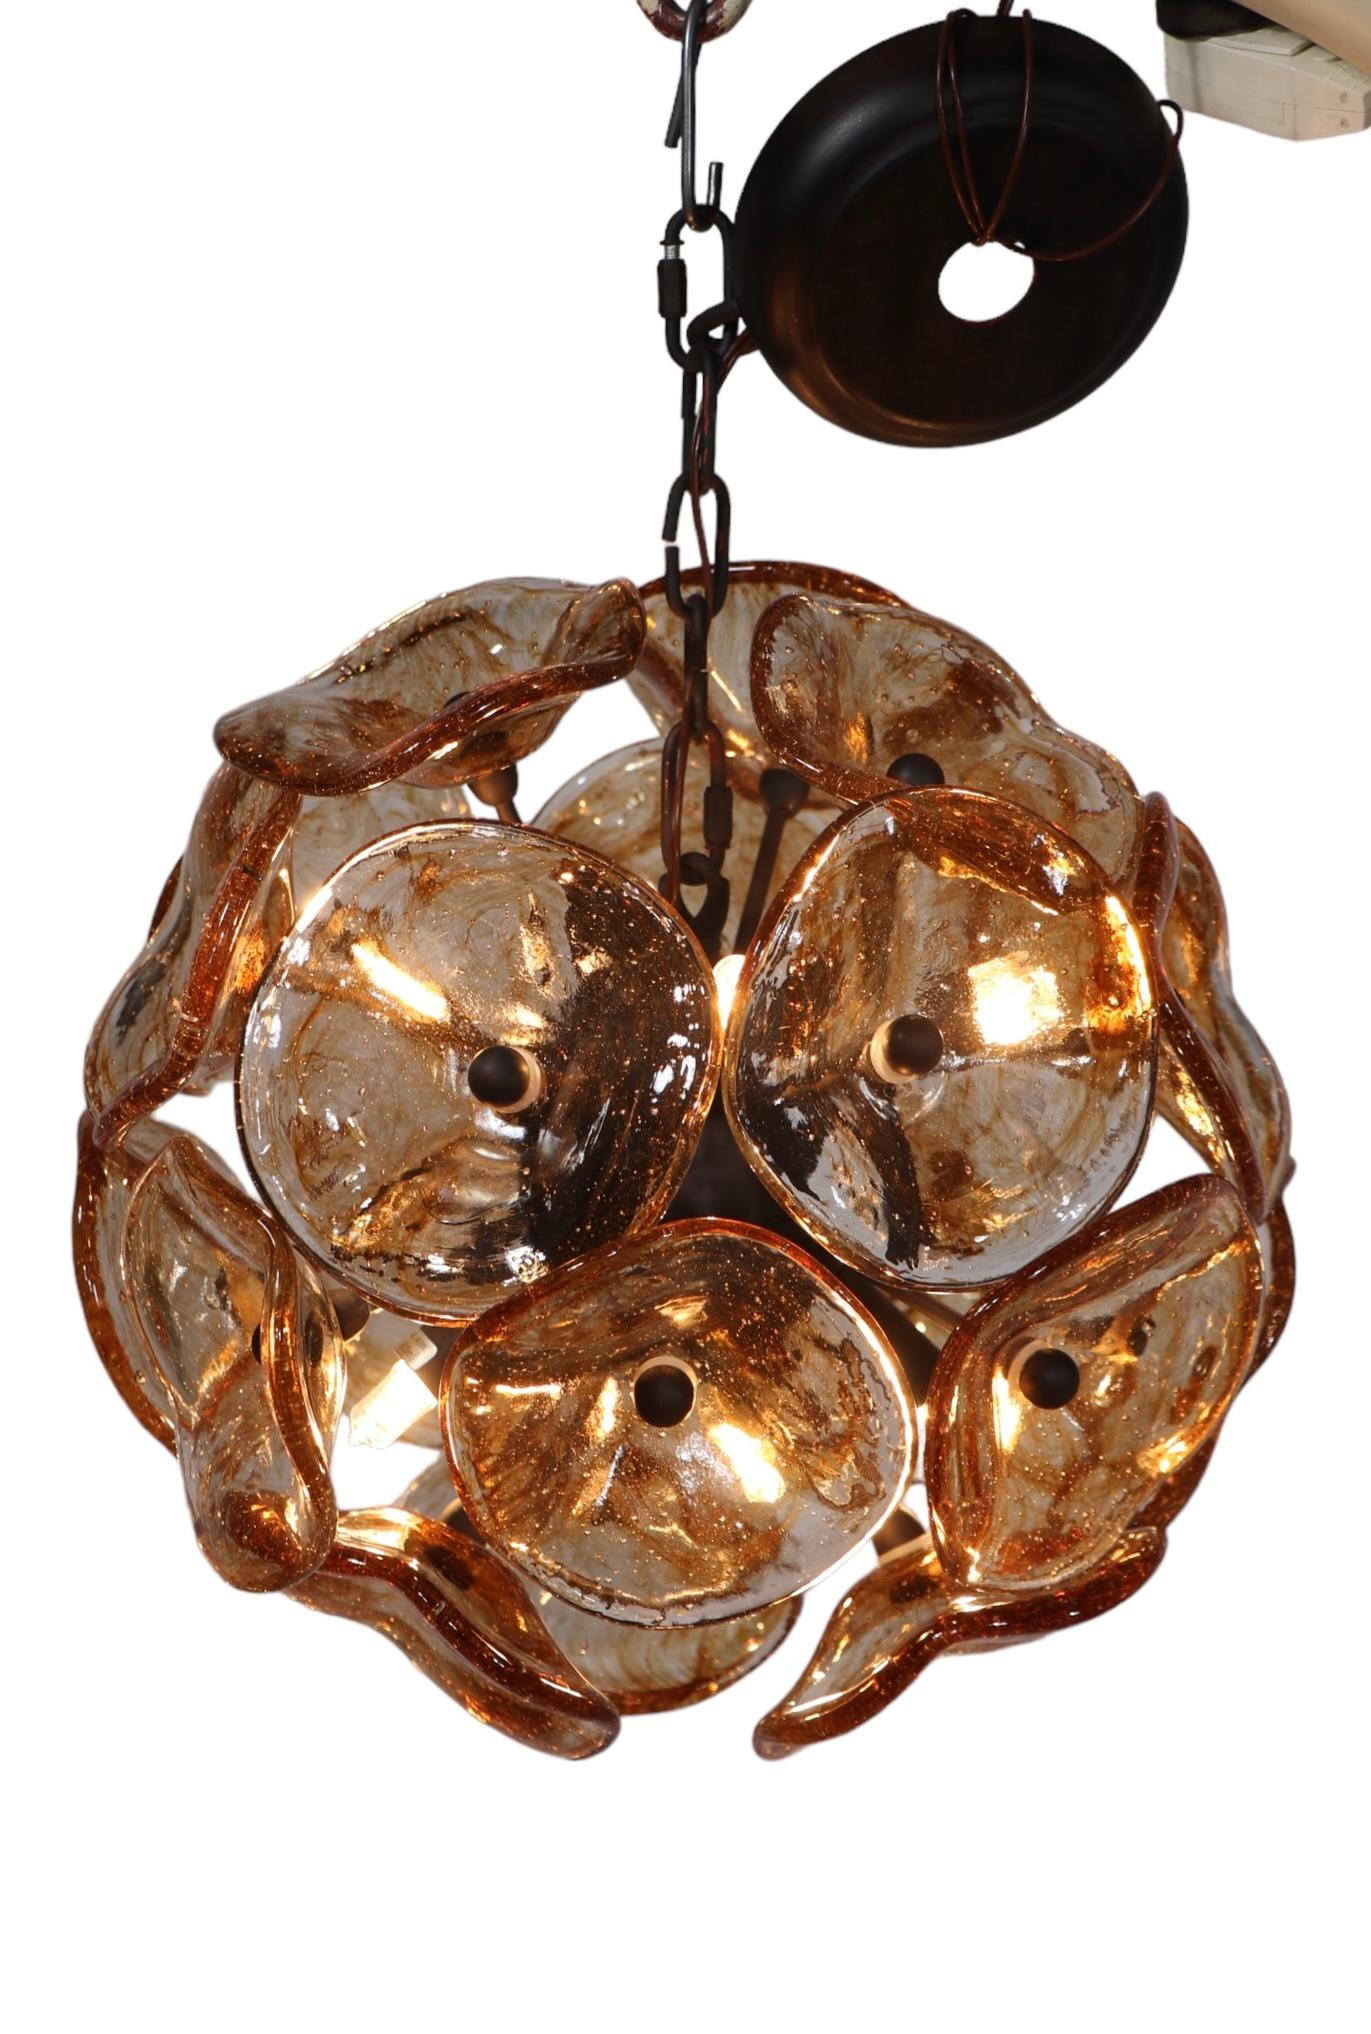 Post Modern Chandelier with Murano Glass Flowers by Fiori c 1990 -2010 For Sale 8